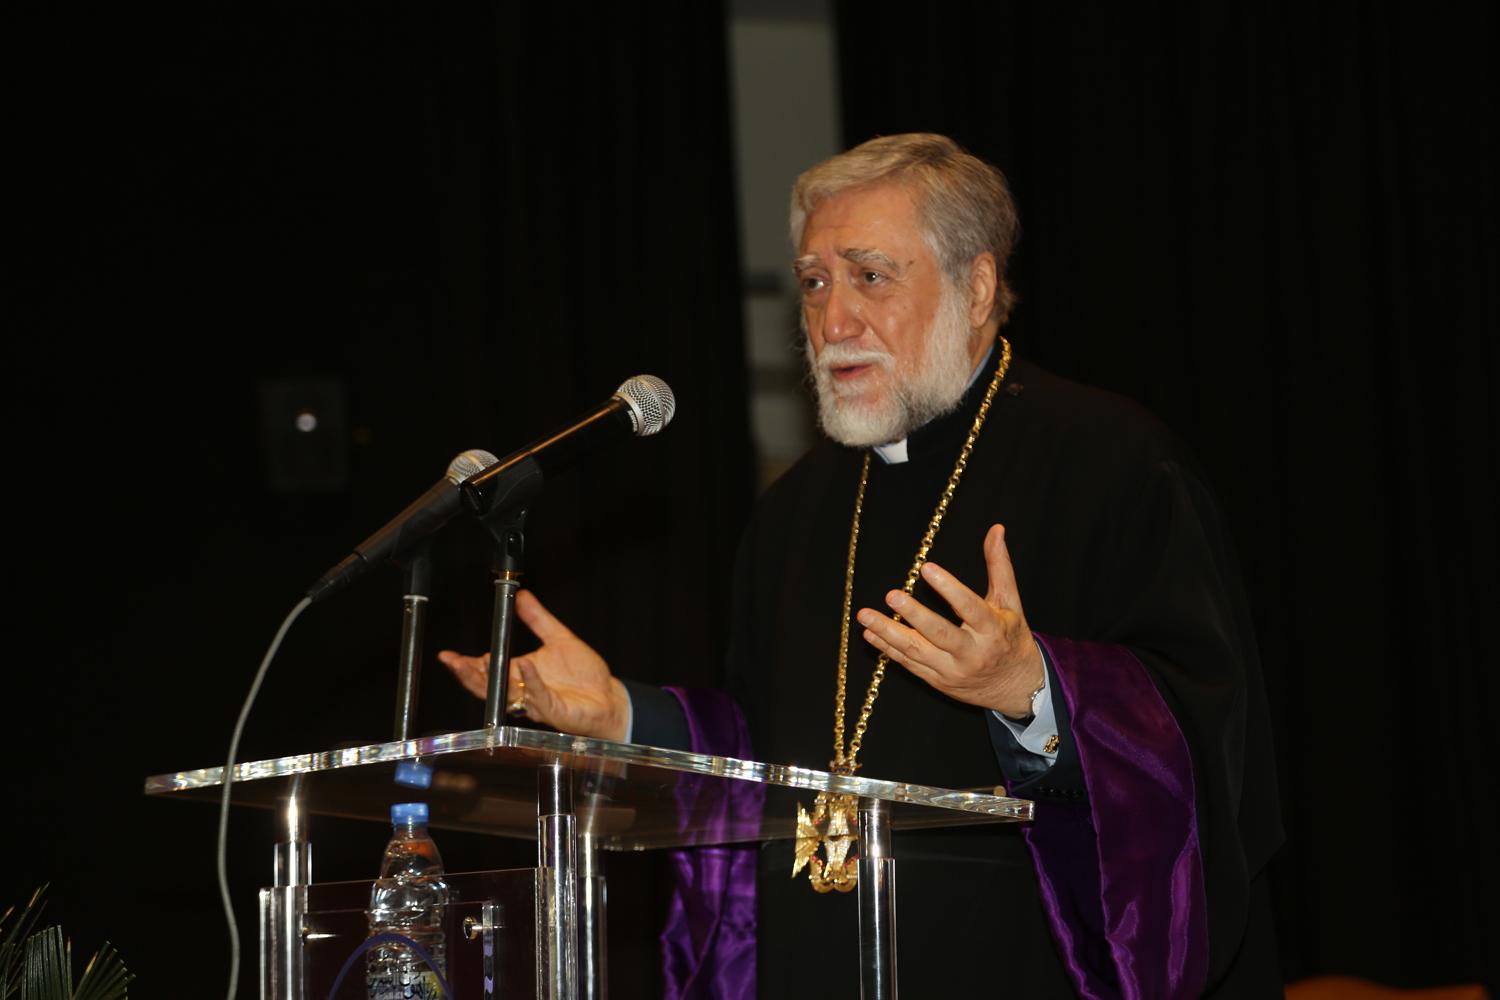 “THE ECUMENICAL MOVEMENT IS IN SEARCH OF NEW IDENTITY AND SELF-ARTICULATION” H.H. ARAM I